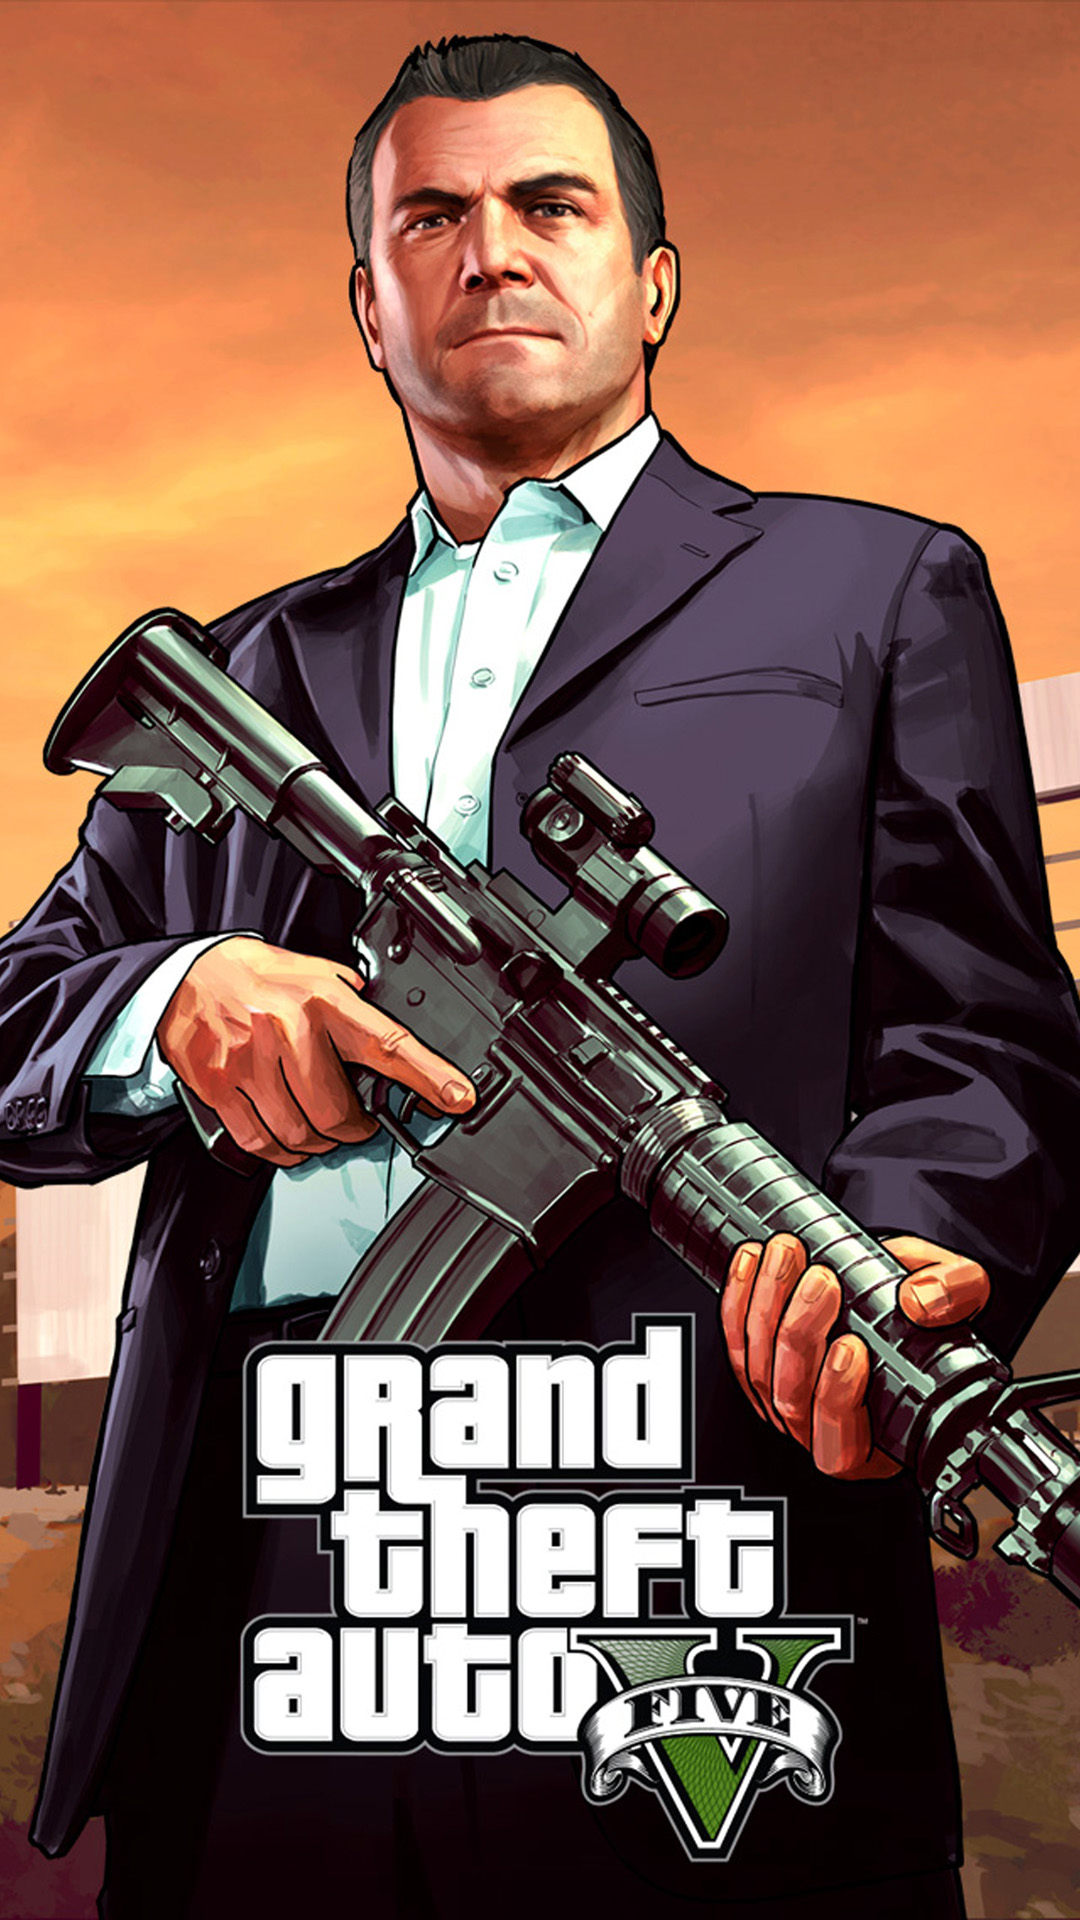 Gta 5 Hd Wallpapers For Android - Grand theft auto v wallpaper, man